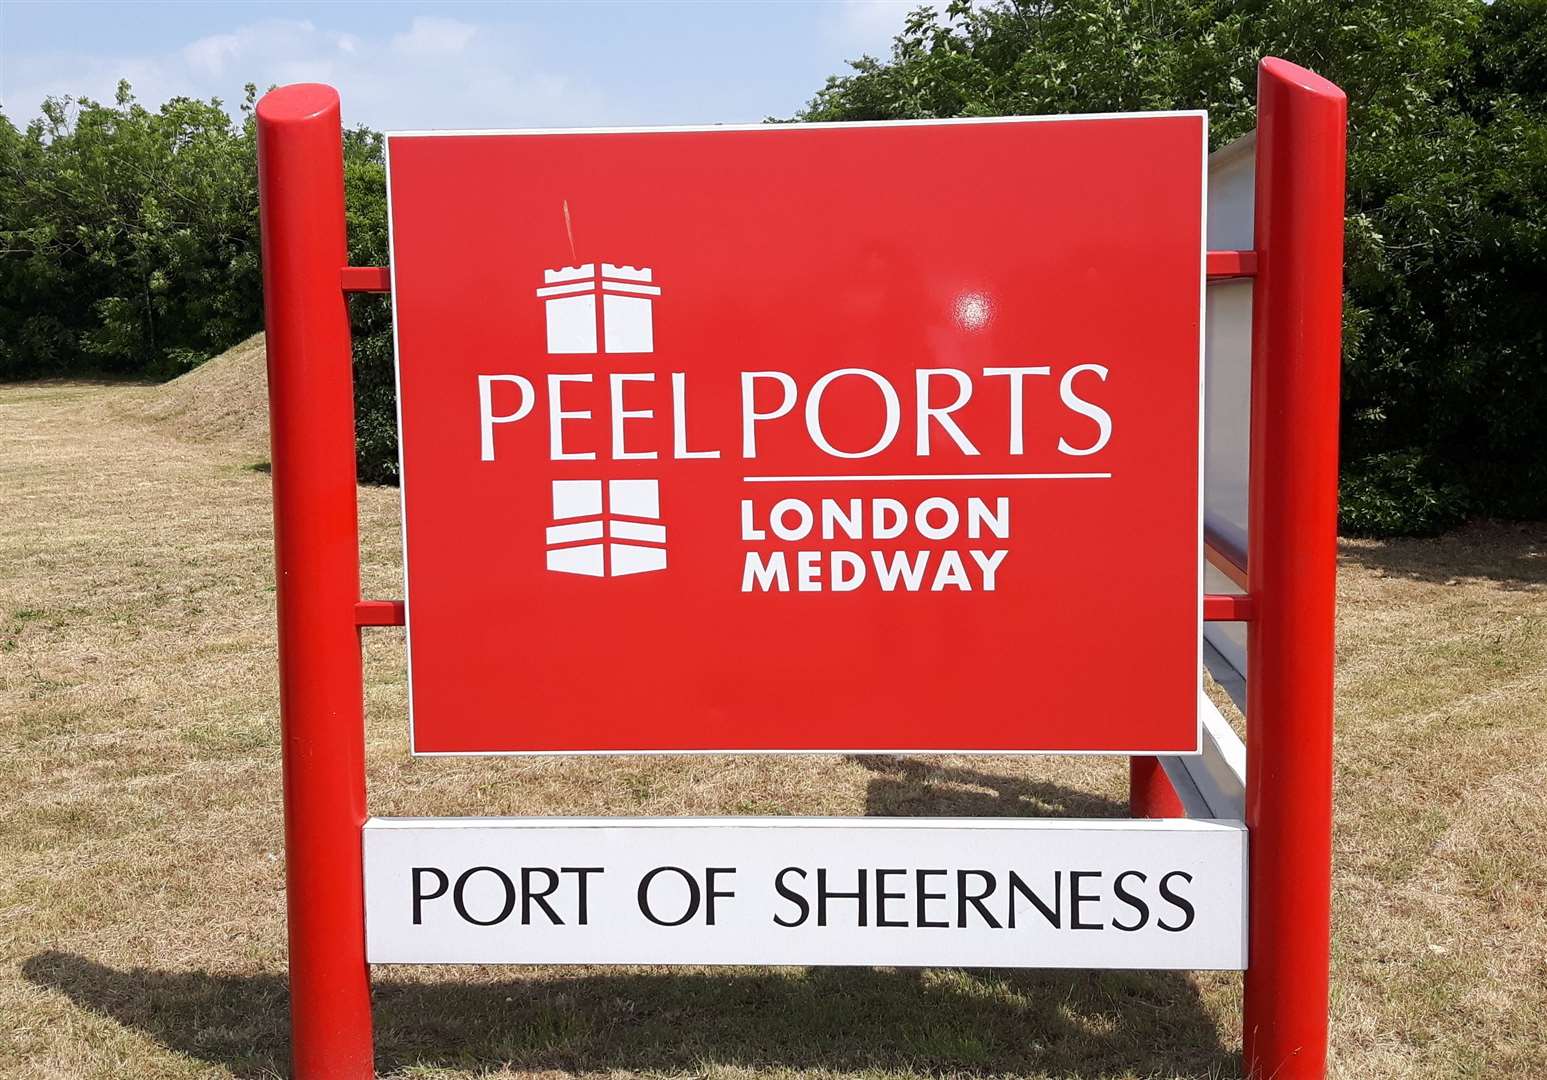 Peel Ports has been asked to safeguard the Sheerness Boat Store